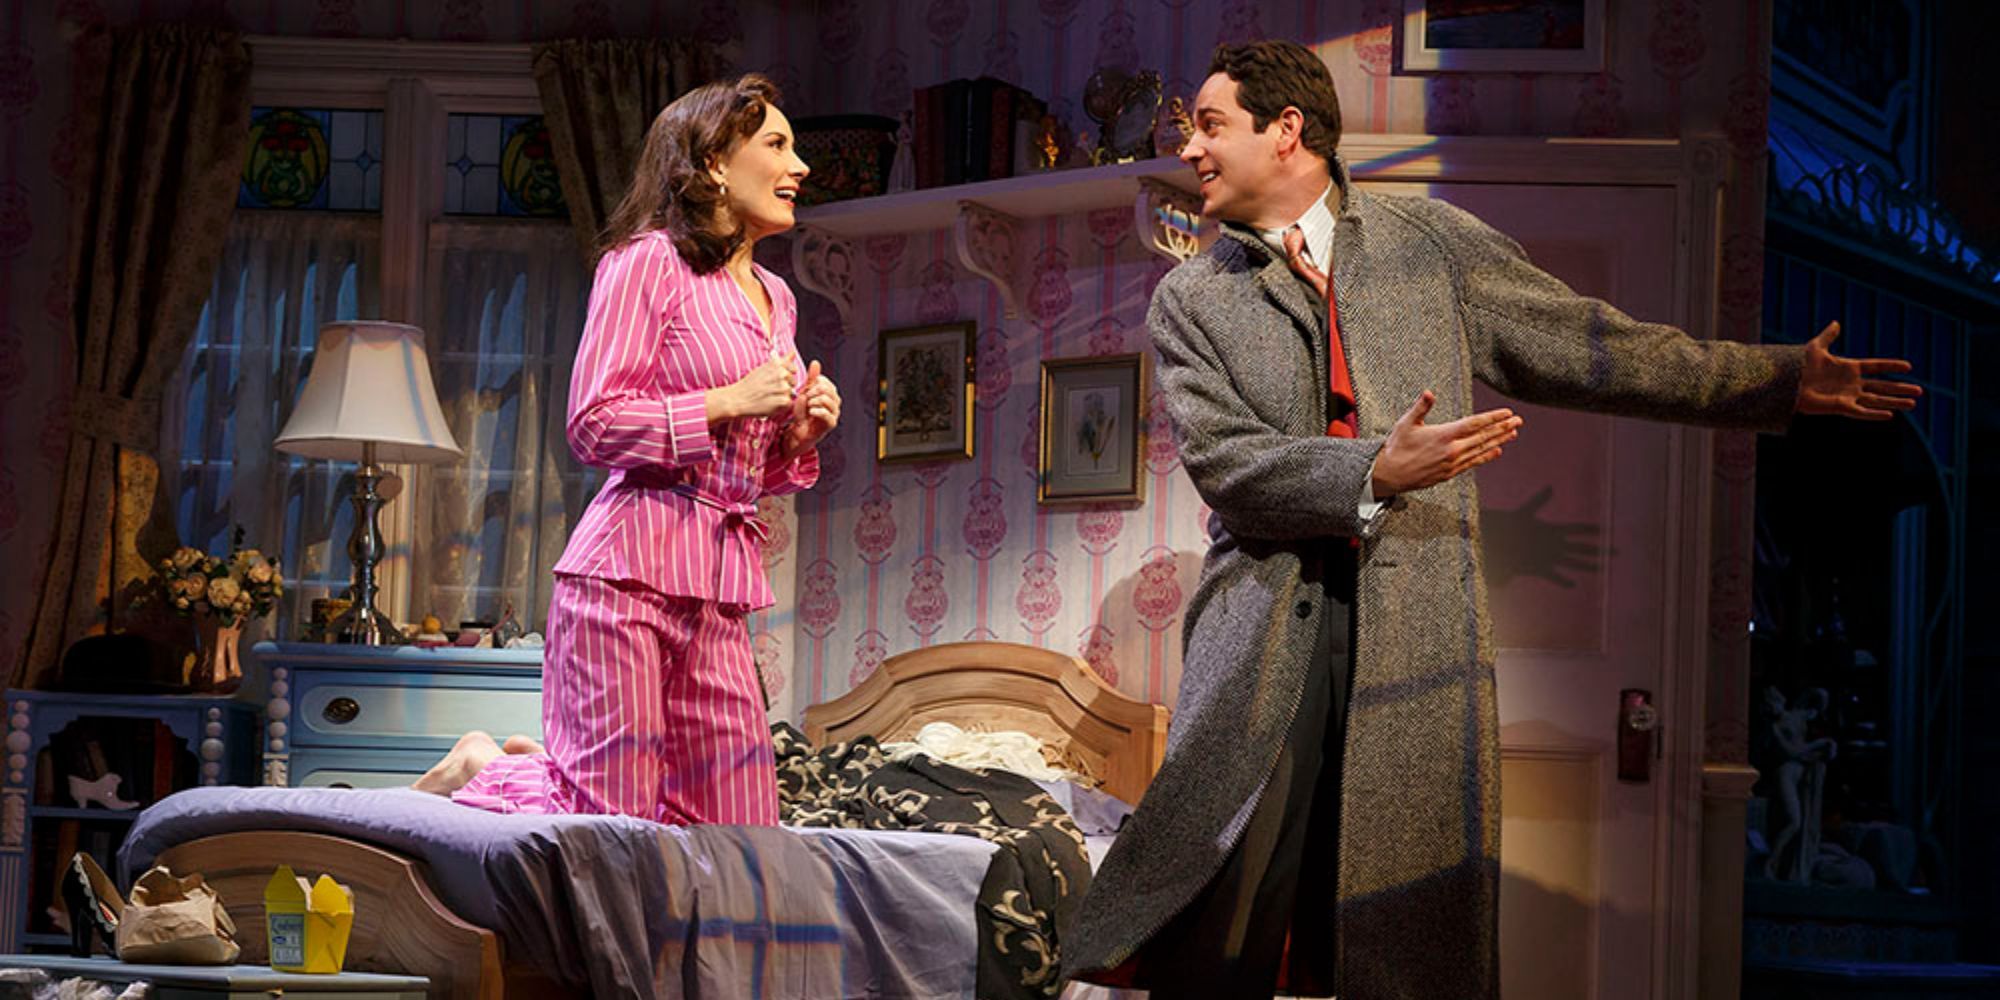 Laura Benanti and Zachary Levi as Amalia and Georg in 